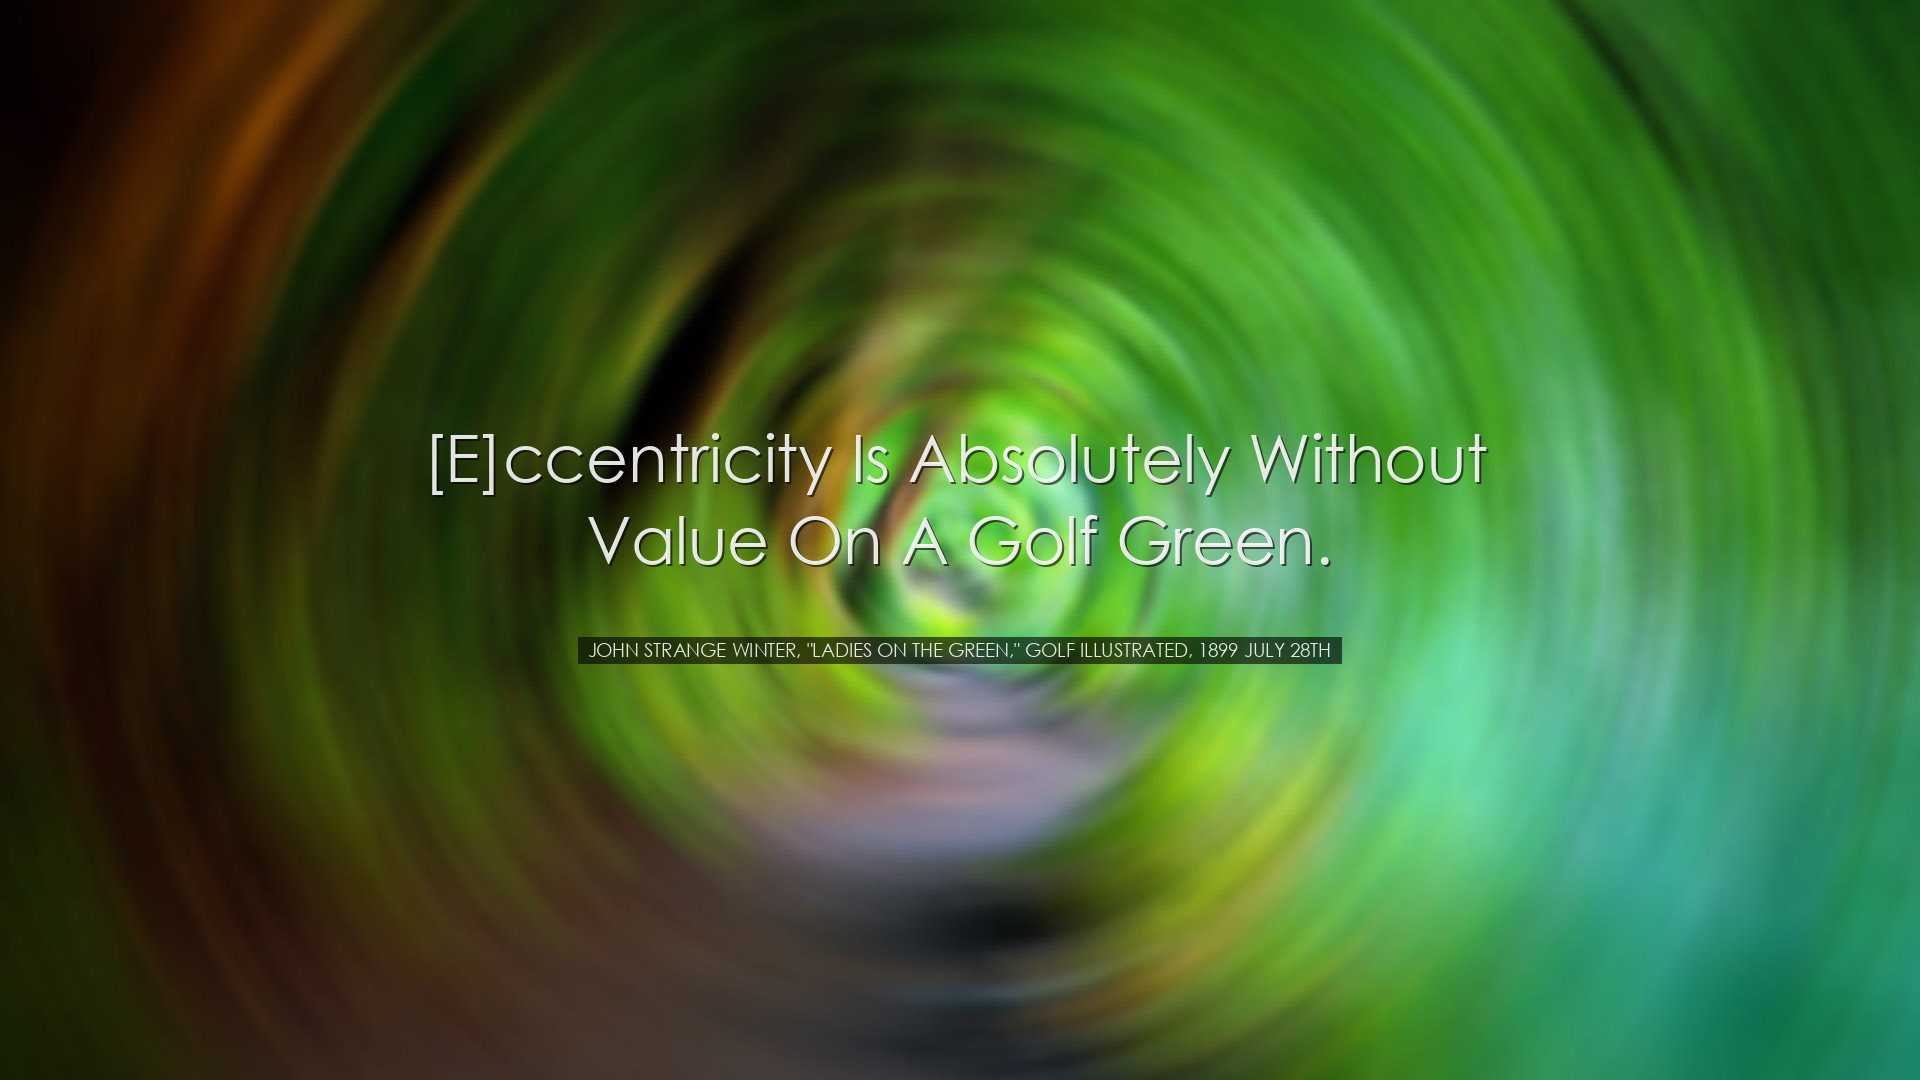 [E]ccentricity is absolutely without value on a Golf green. - John